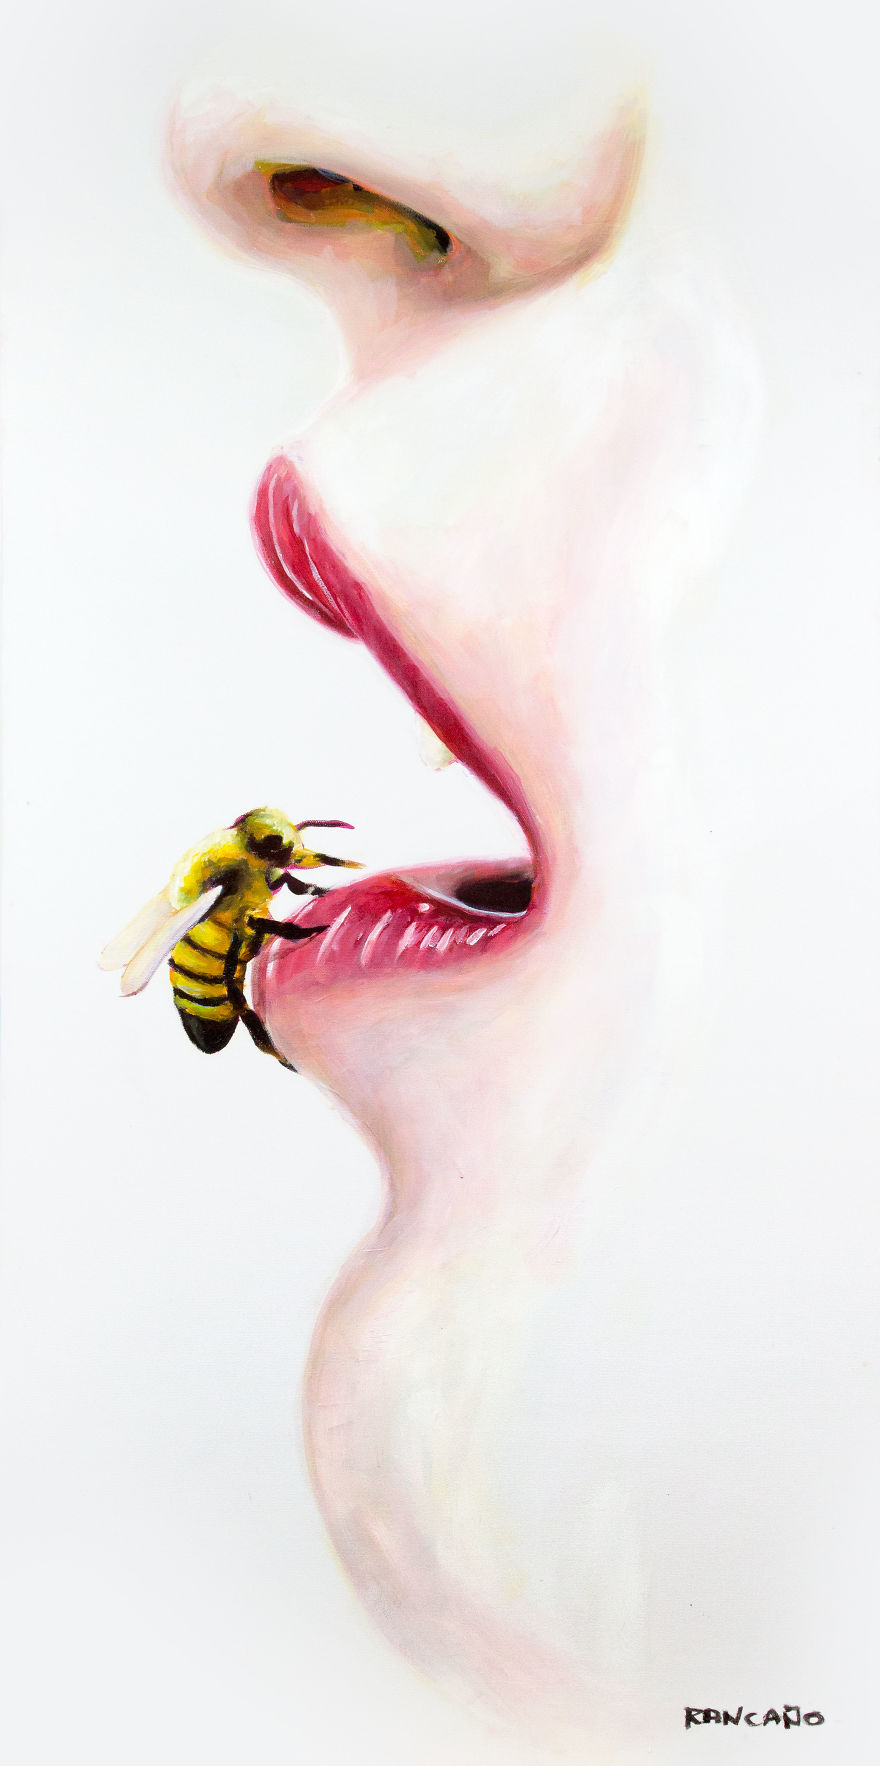 I Painted Bees And Birds On Women's Lips